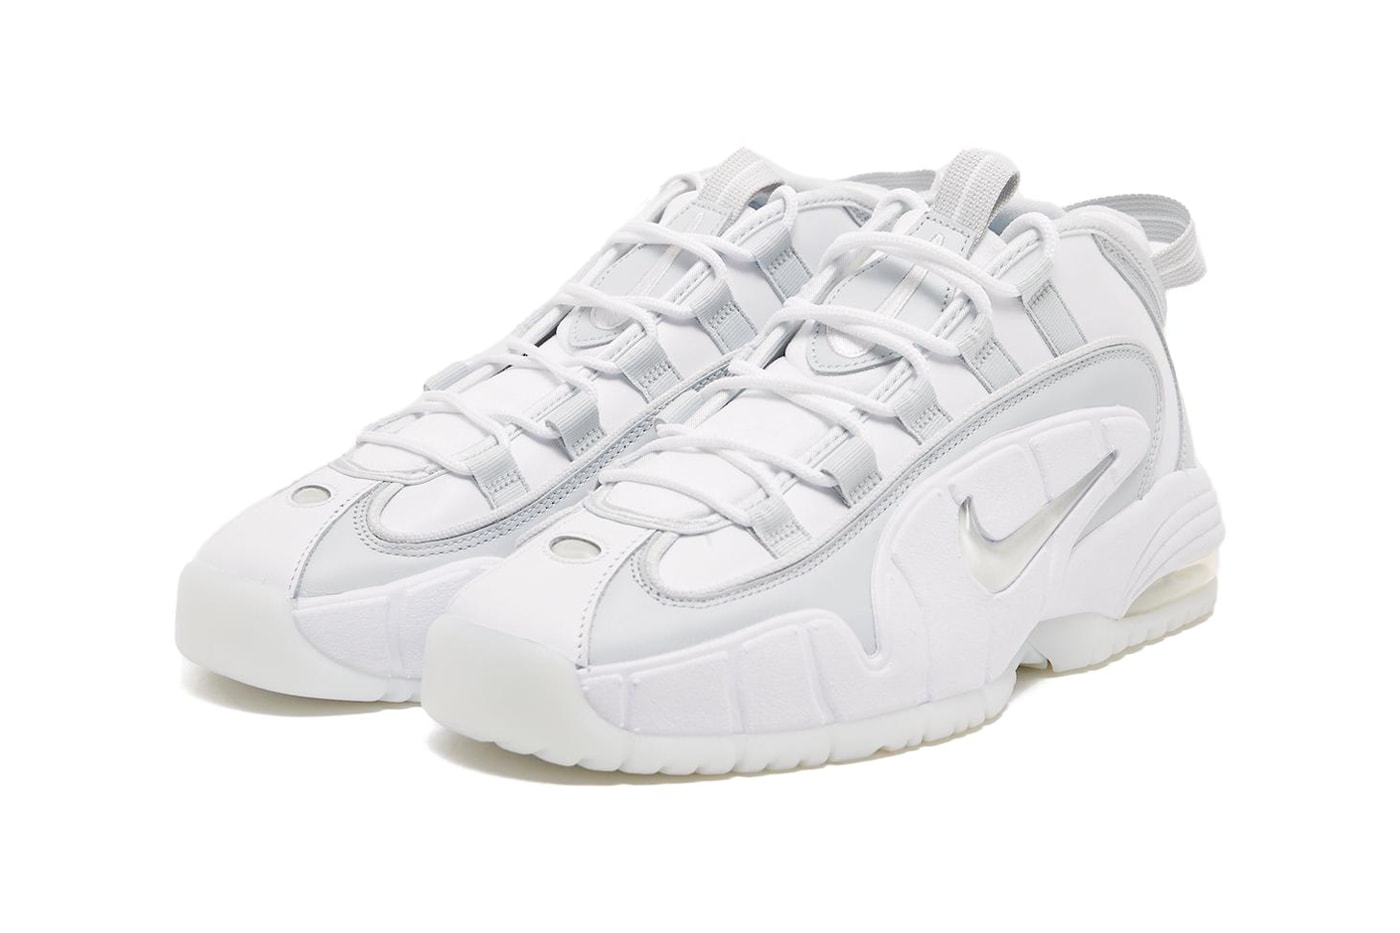 Nike Air Max Penny 1 Arrives in an All-White "Pure Platinum" Colorway DV7220-100 high top basketball penny hardaway orlando magic